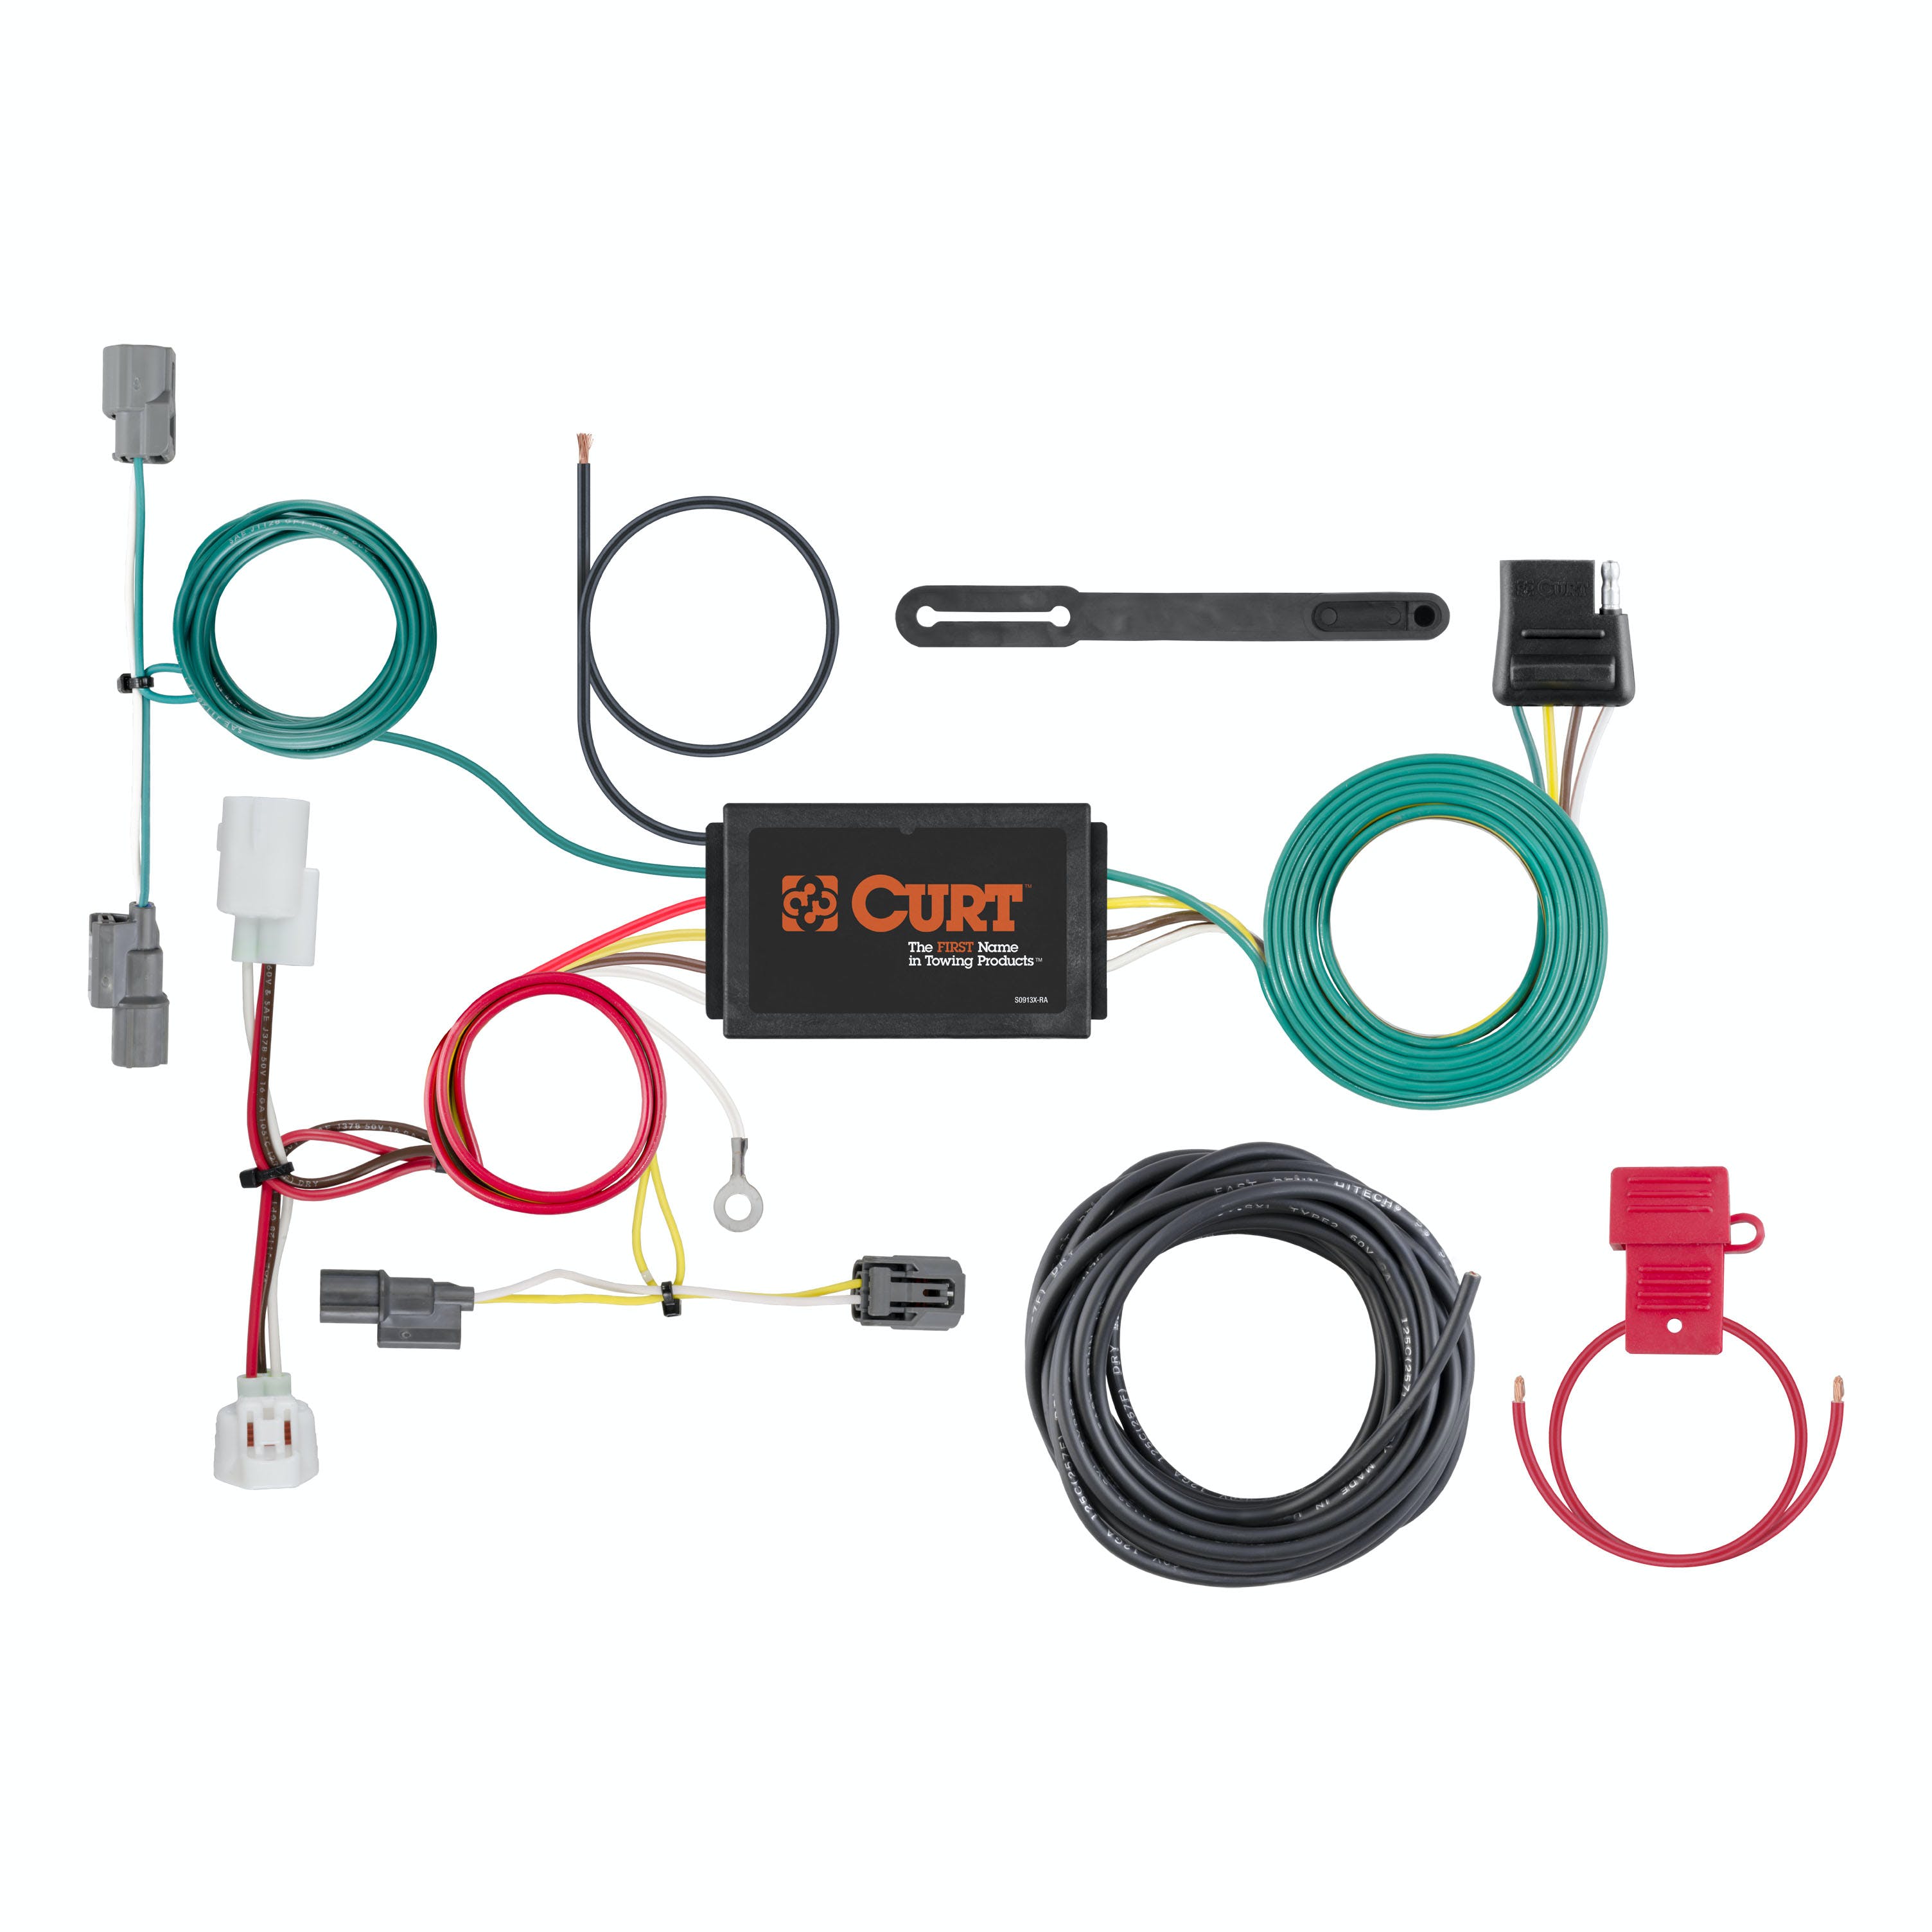 CURT 56269 Custom Wiring Harness, 4-Way Flat Output, Select Acura ILX